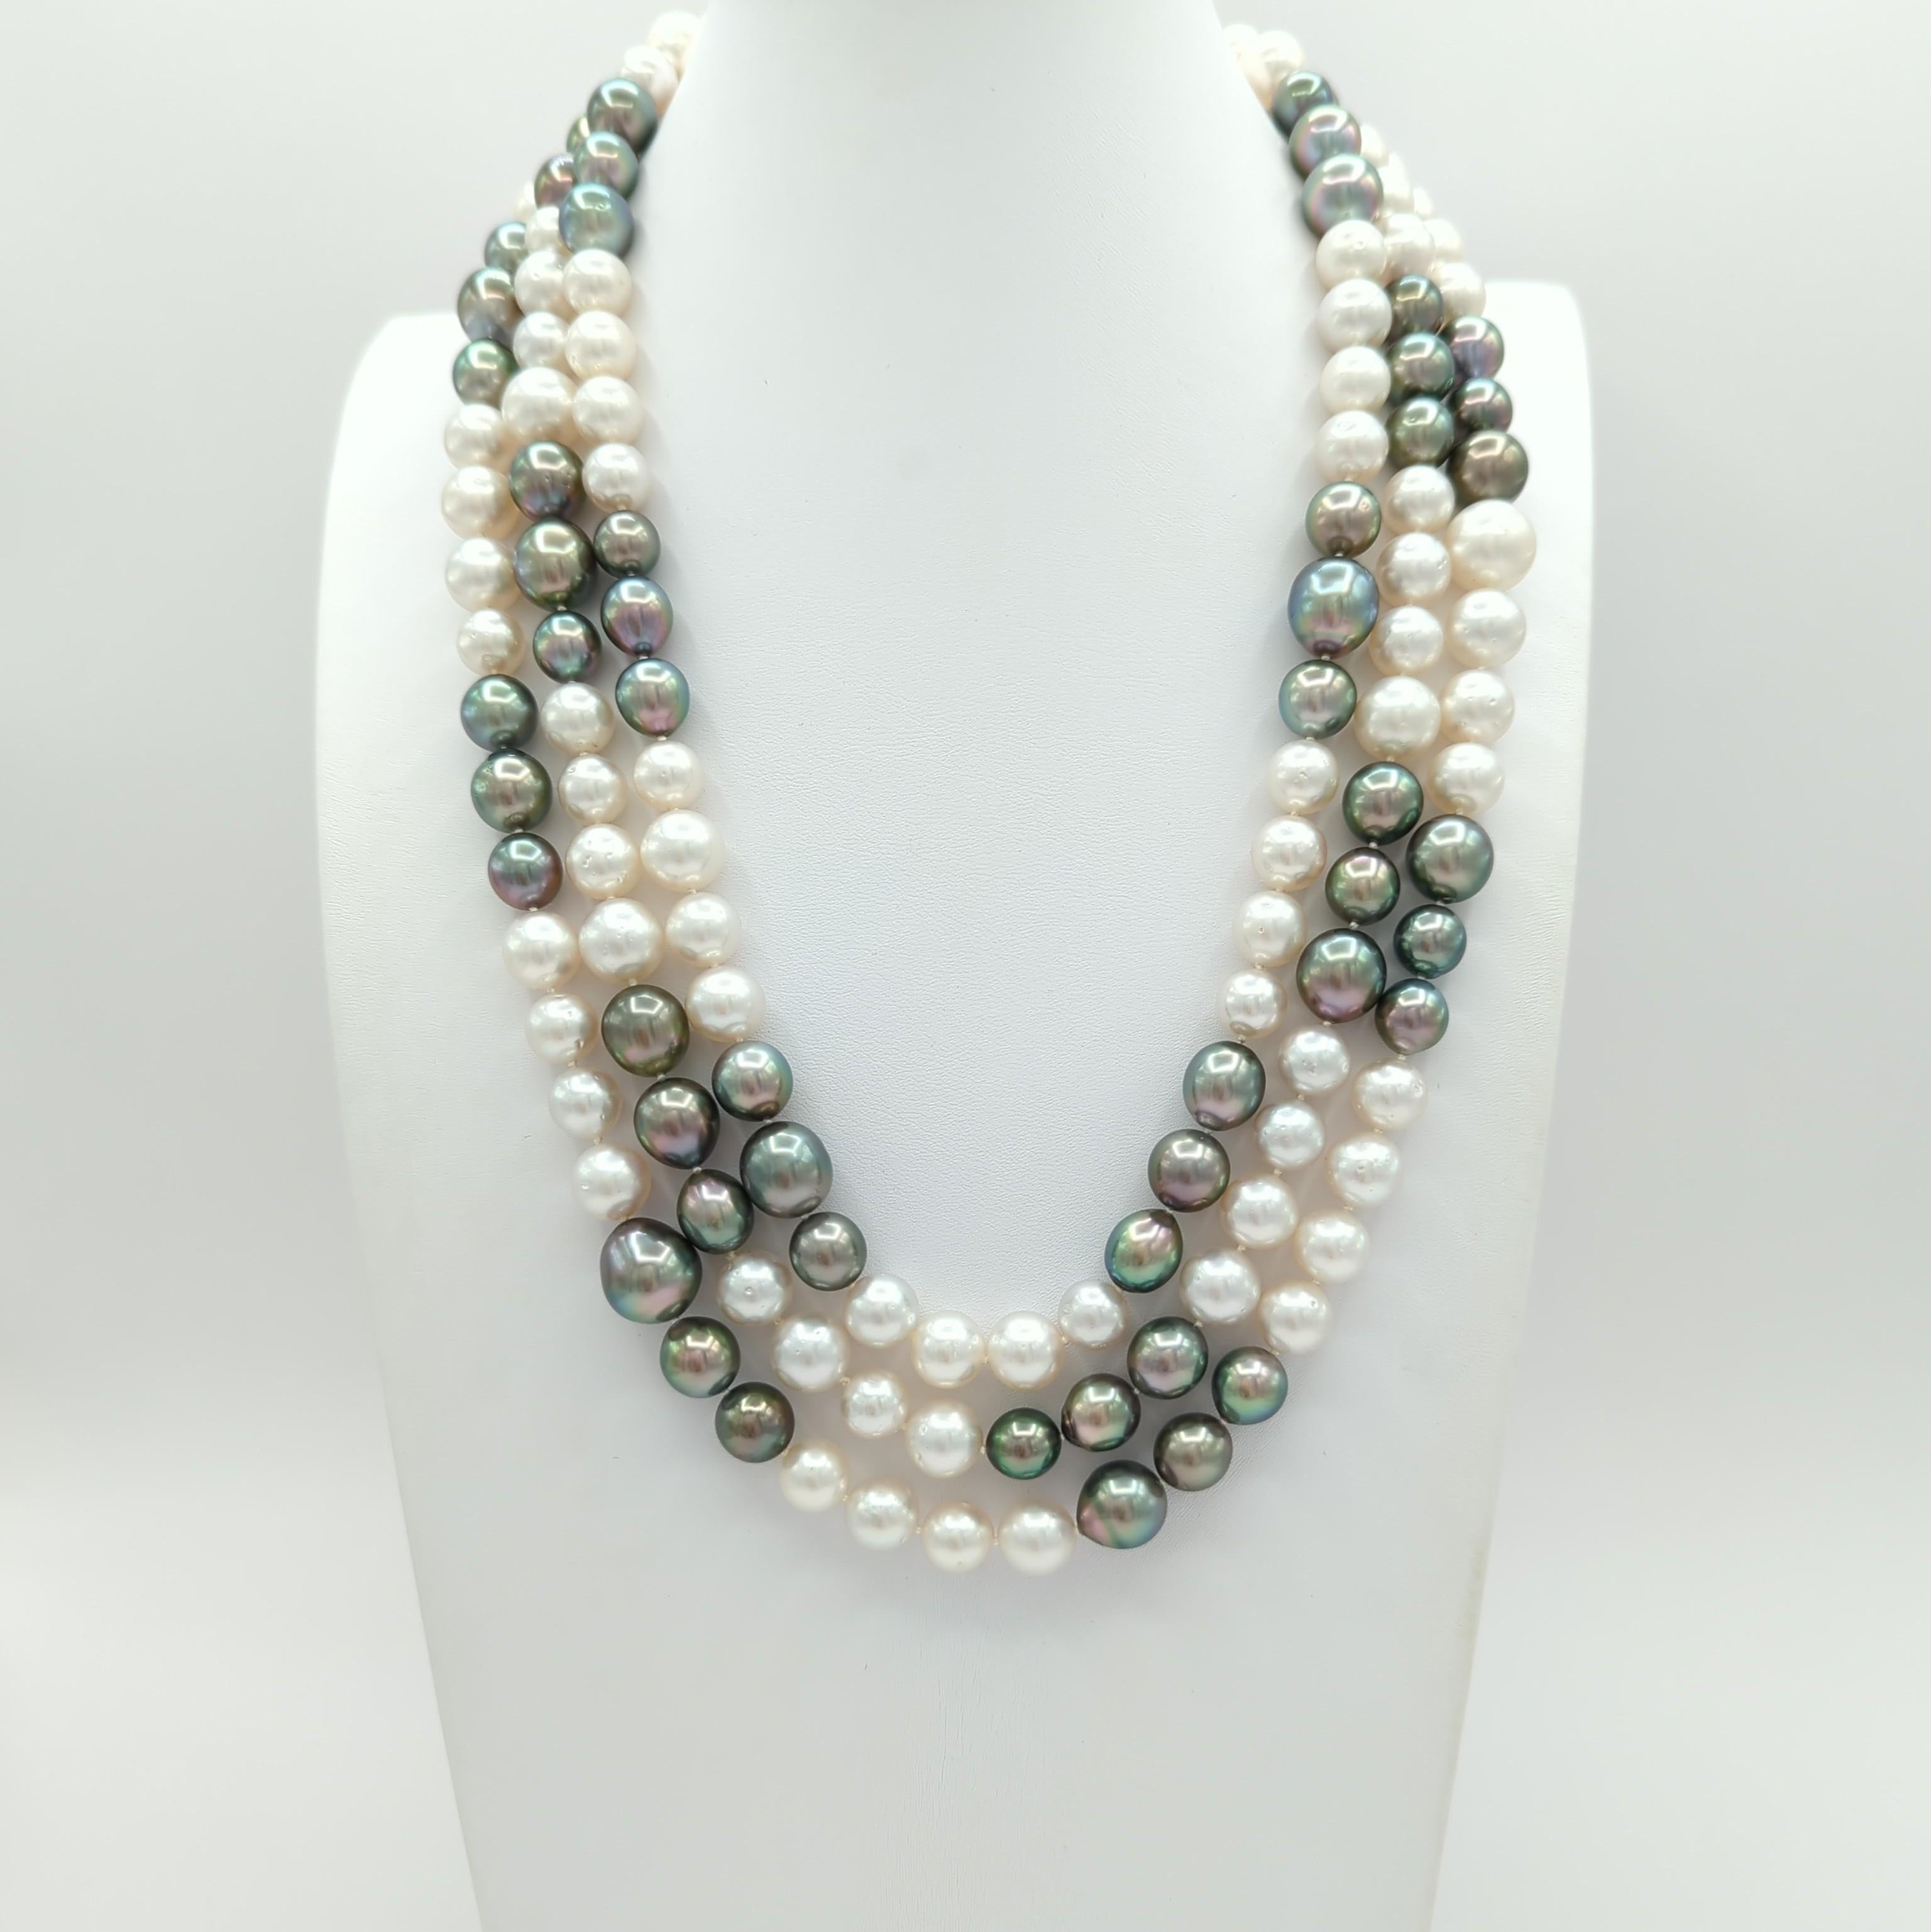 Gorgeous white South Sea round pearls and Tahitian round pearls.  Hand strung, length is 66